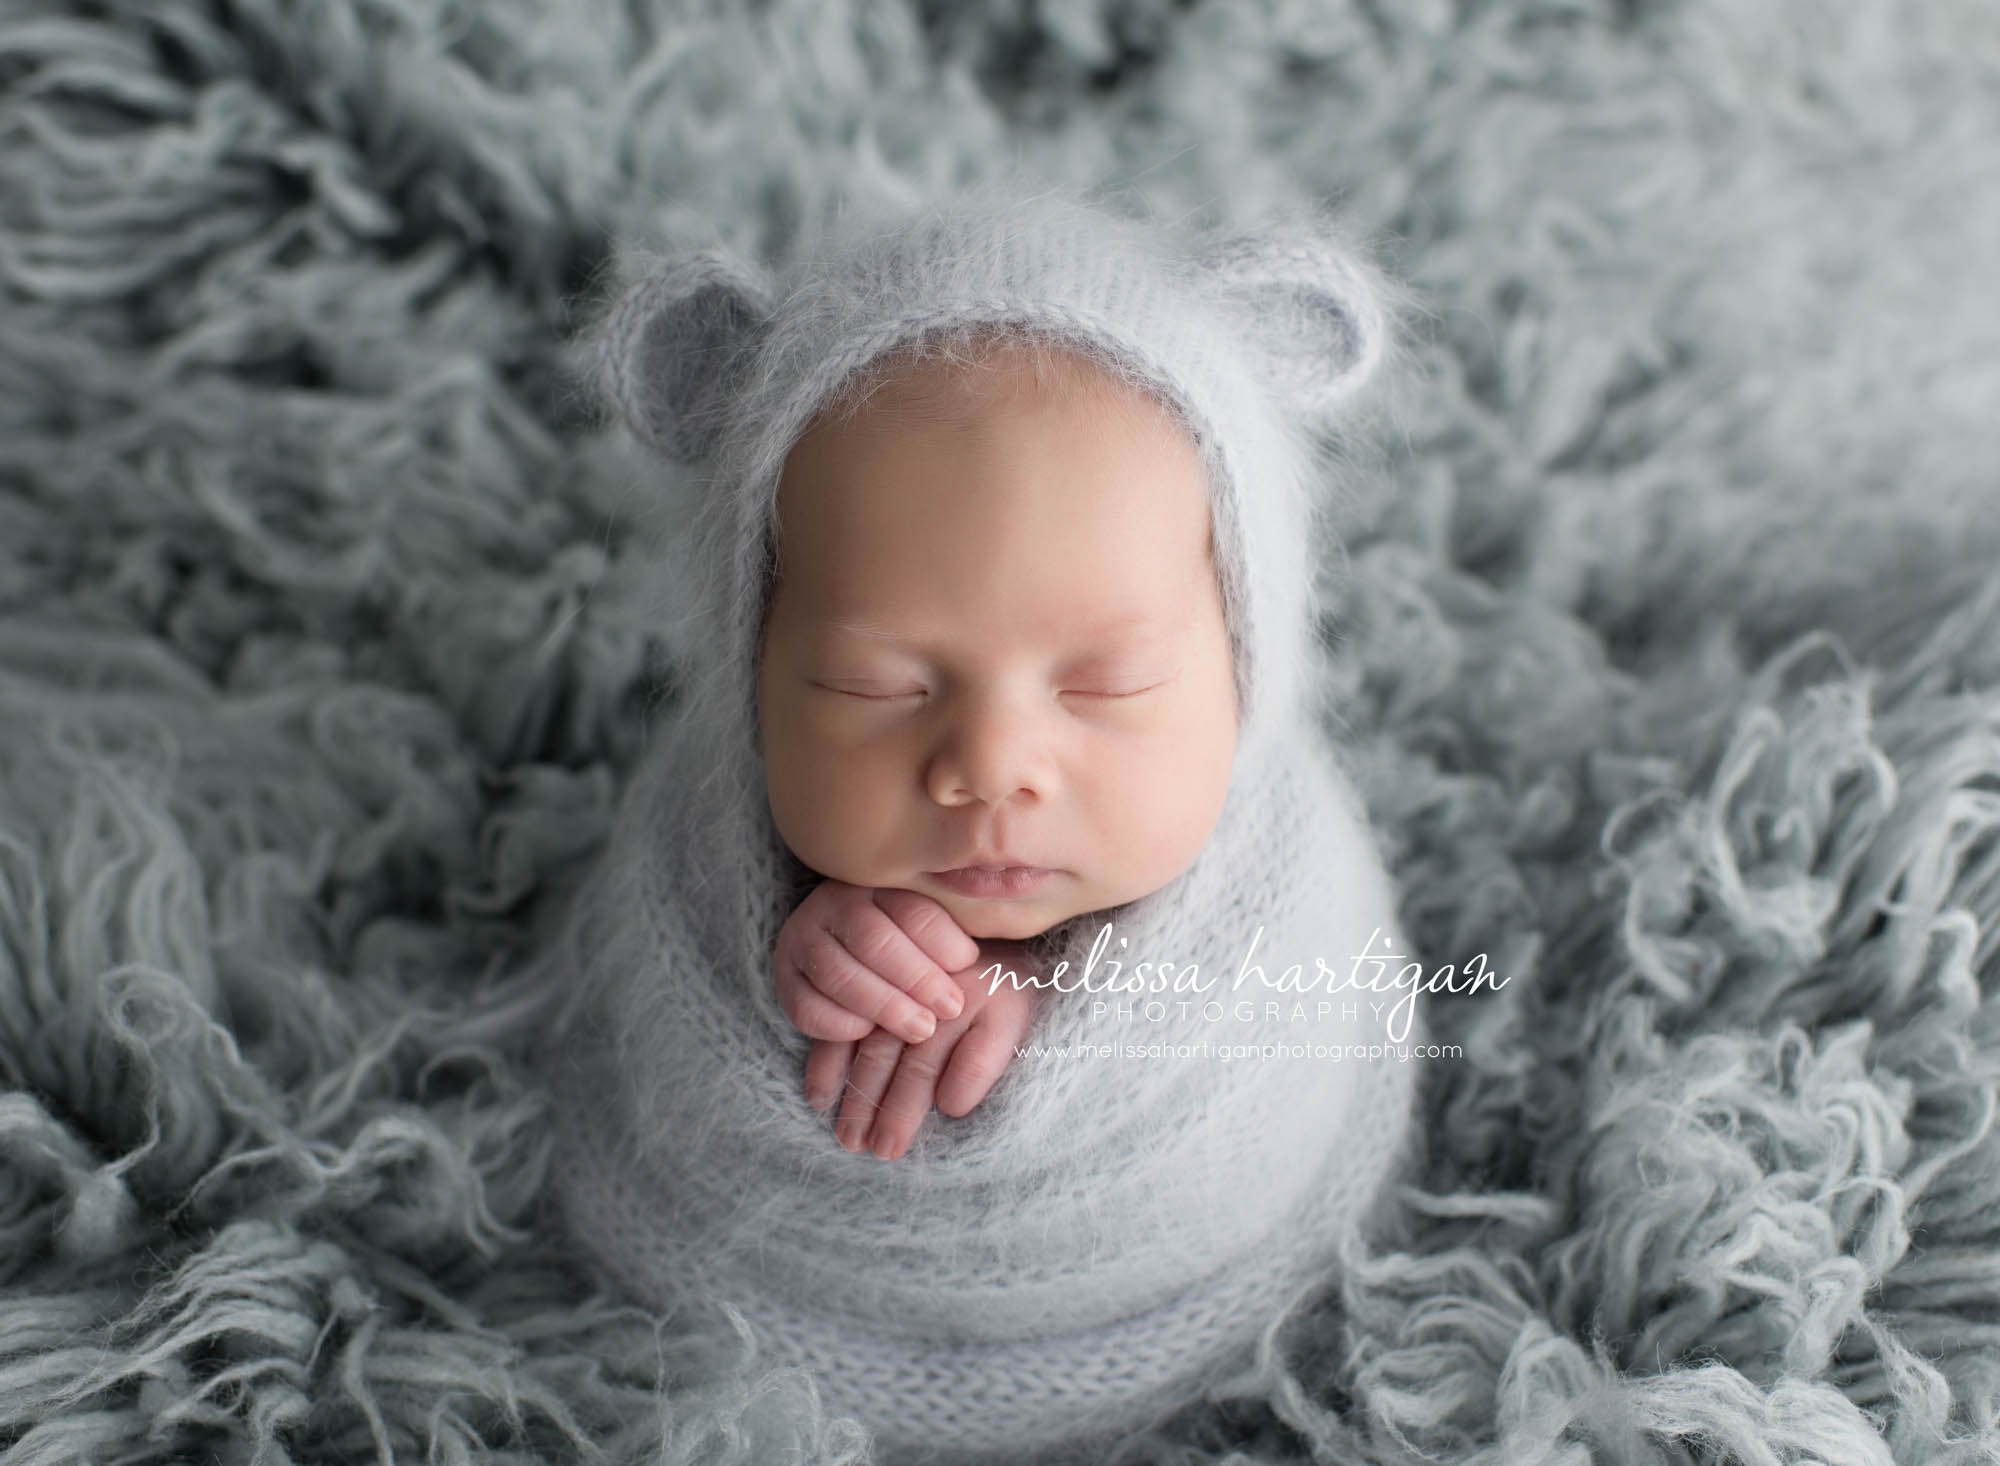 Melissa Hartigan Photography CT Newborn Photographer Taave CT Newborn Session baby boy sleeping wearing light blue snit hat with ears and matching wrap with hands sticking out